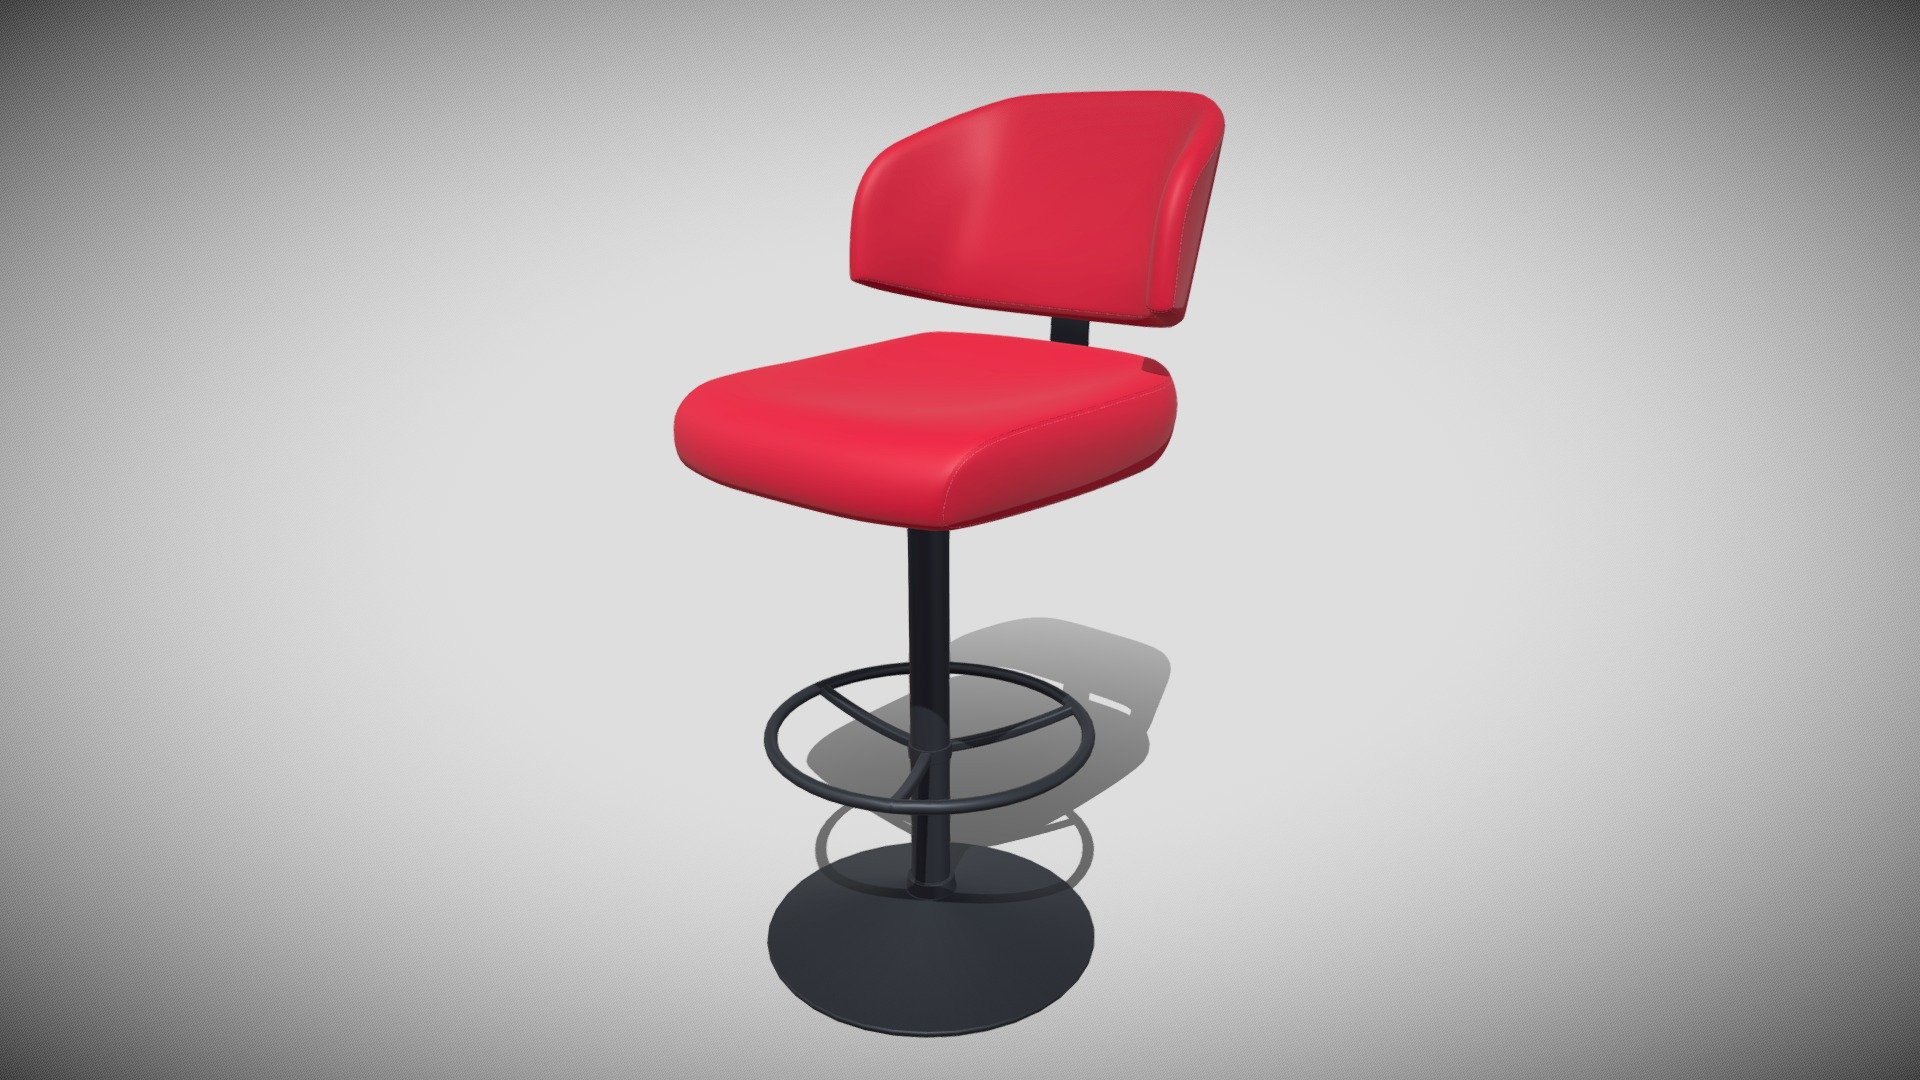 Detailed model of a Bar Stool, modeled in Cinema 4D.The model was created using approximate real world dimensions.

The model has 17,516 polys and 16,900 vertices.

The stitching geometry has also been included as a separate object in case you need it. It has 73,470 polys and 85,320 vertices.

An additional file has been provided containing the original Cinema 4D project files with both standard and v-ray materials, textures and other 3d export files such as 3ds, fbx and obj 3d model